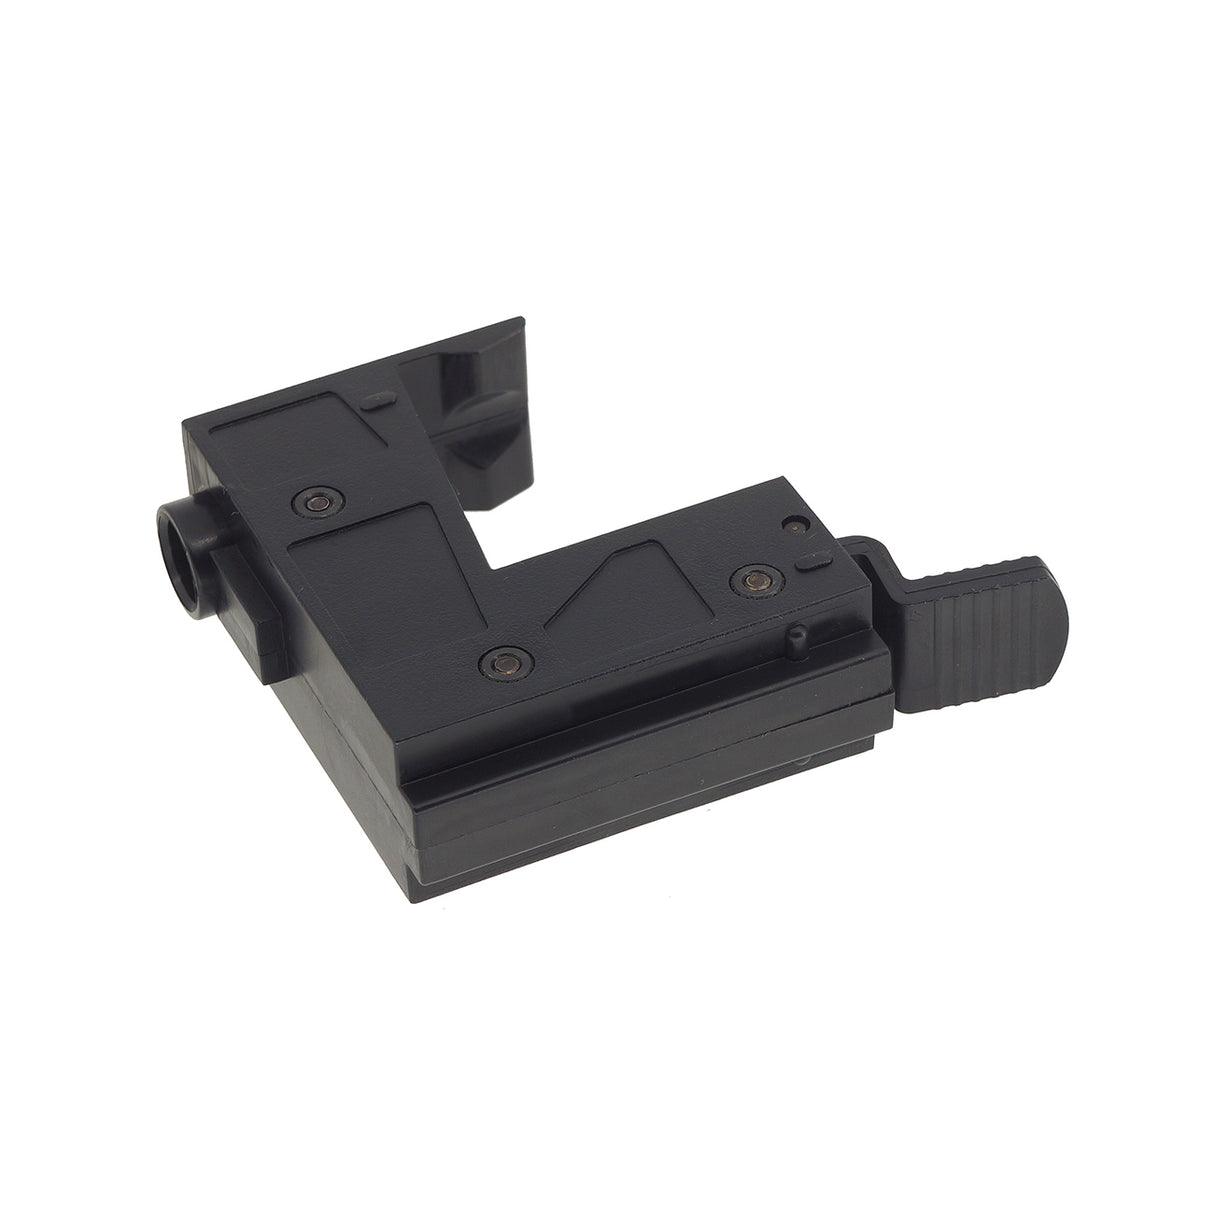 Double Bell M4 to 9mm Magazine Adapter ( DB-M106 )